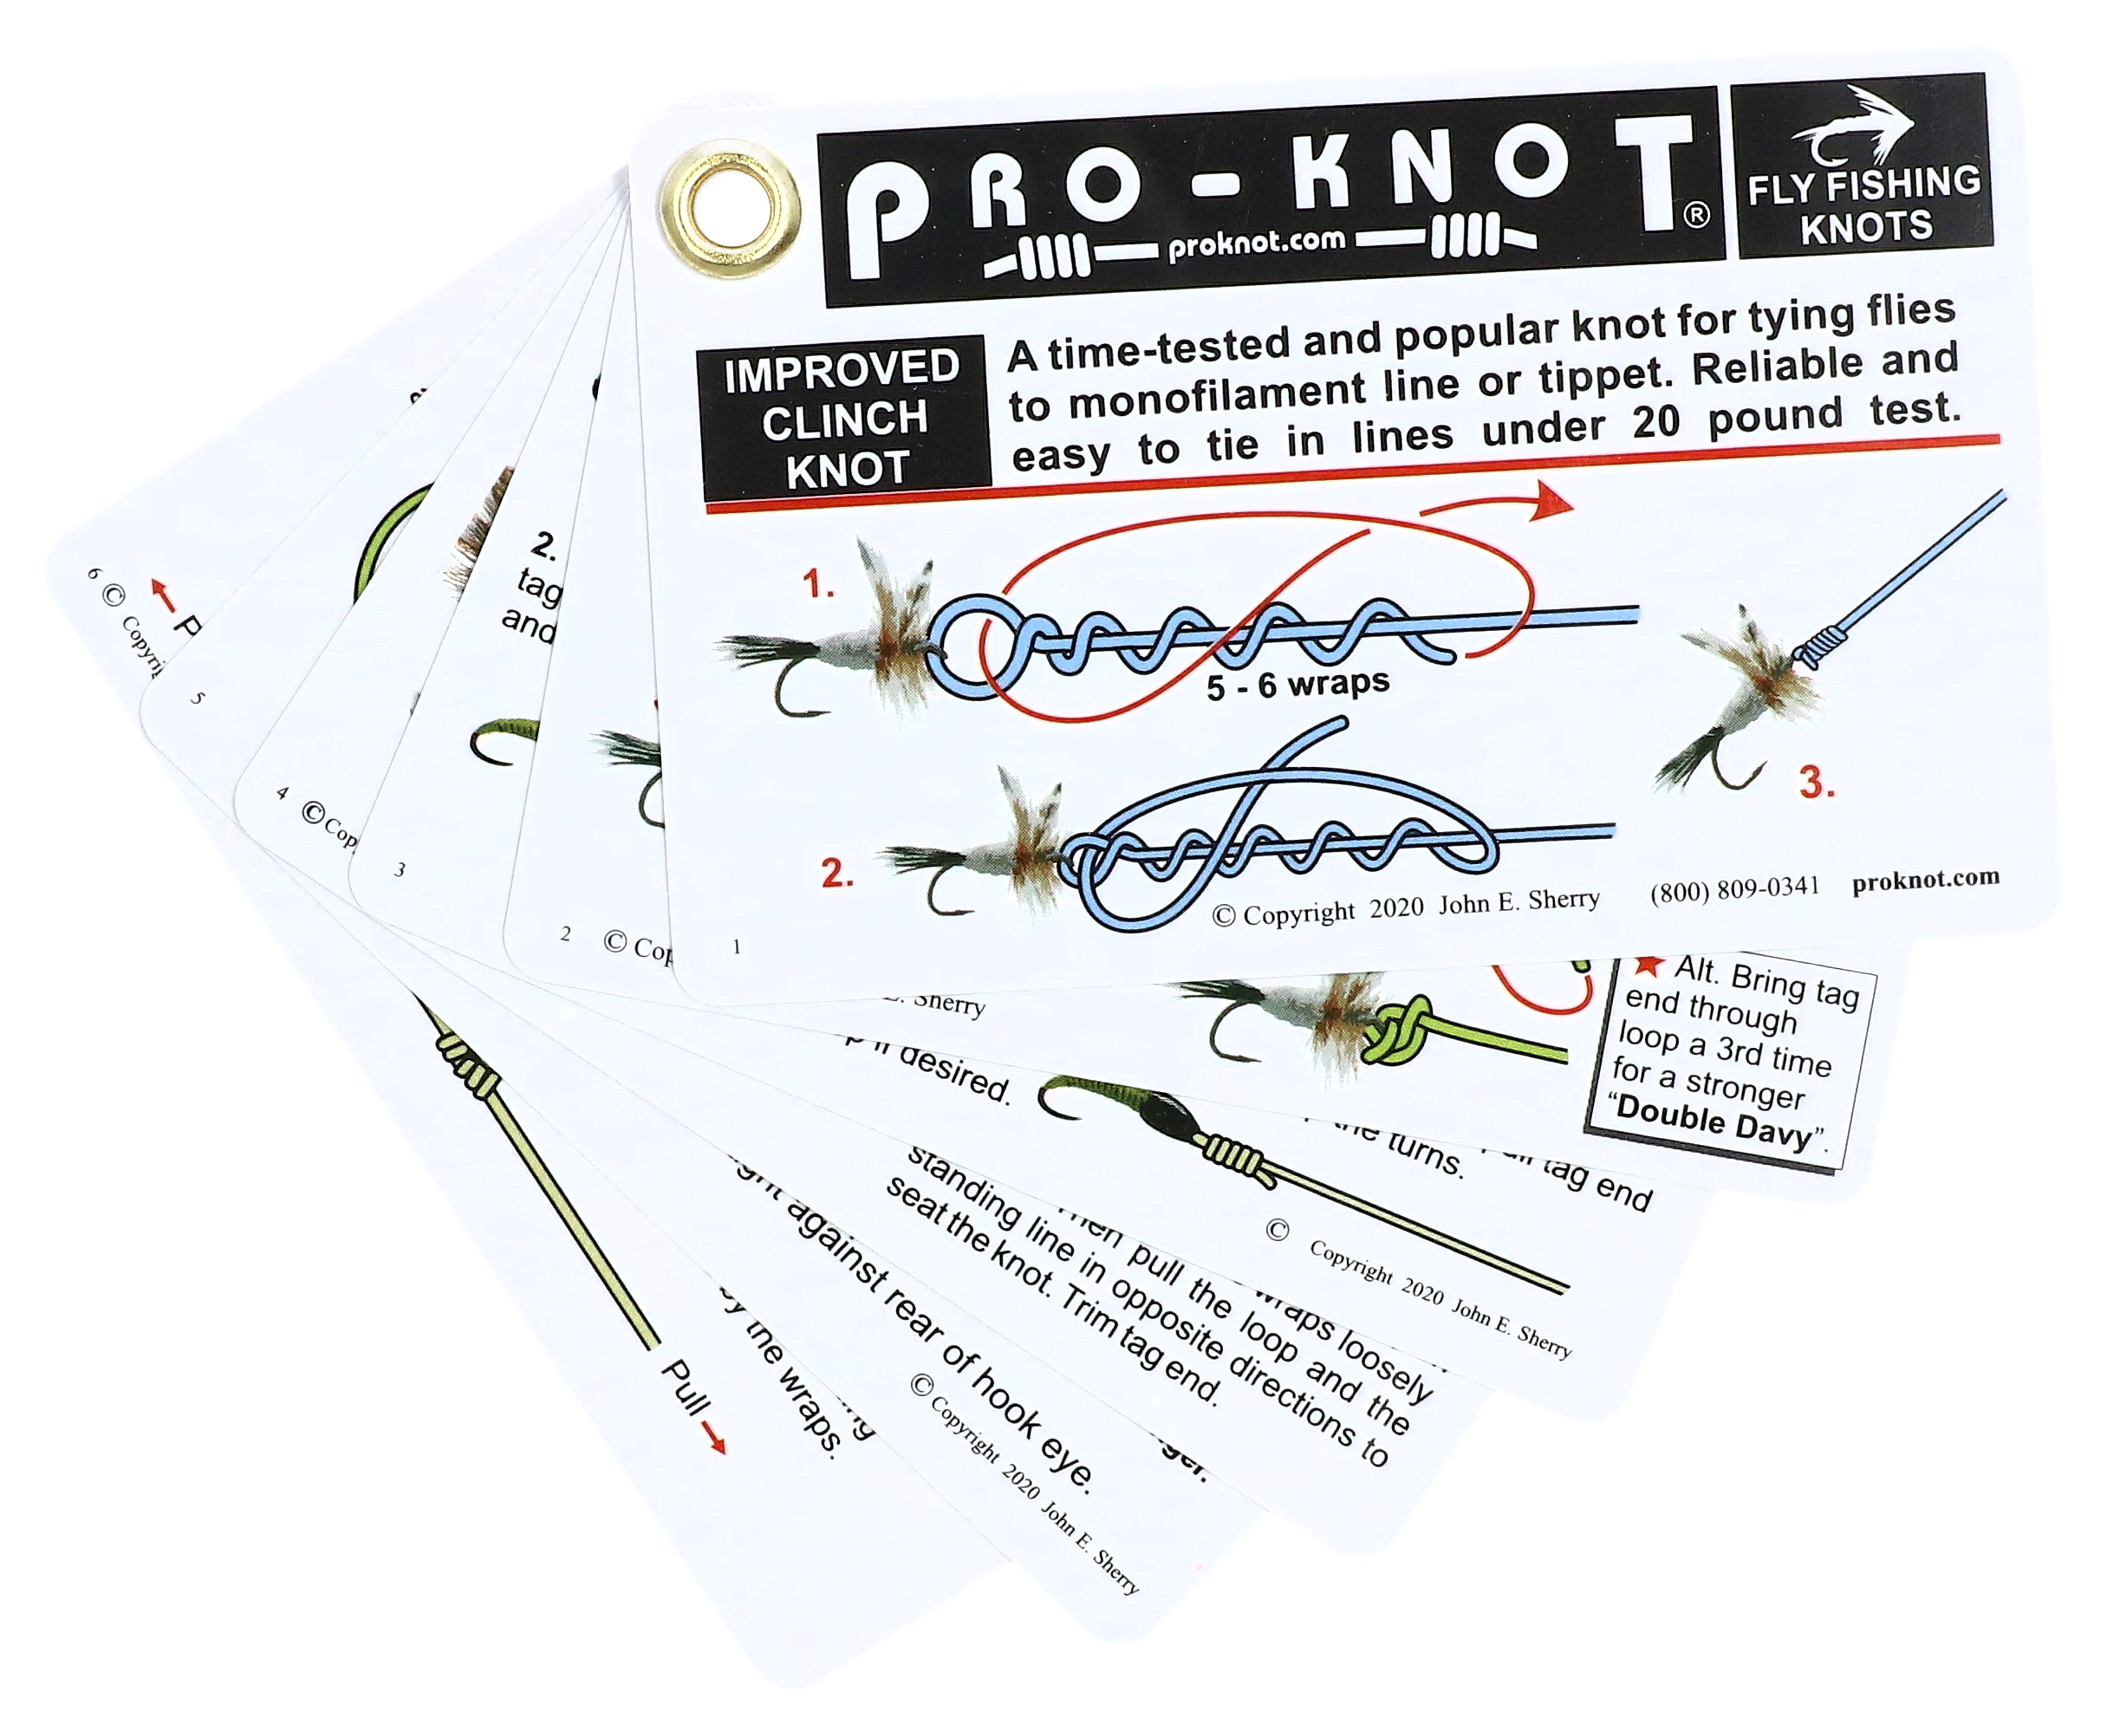 ReferenceReady Fly Fishing Knot Tying Kit – Fly Fishing Knot Cards,  Nippers, and Fishing Line